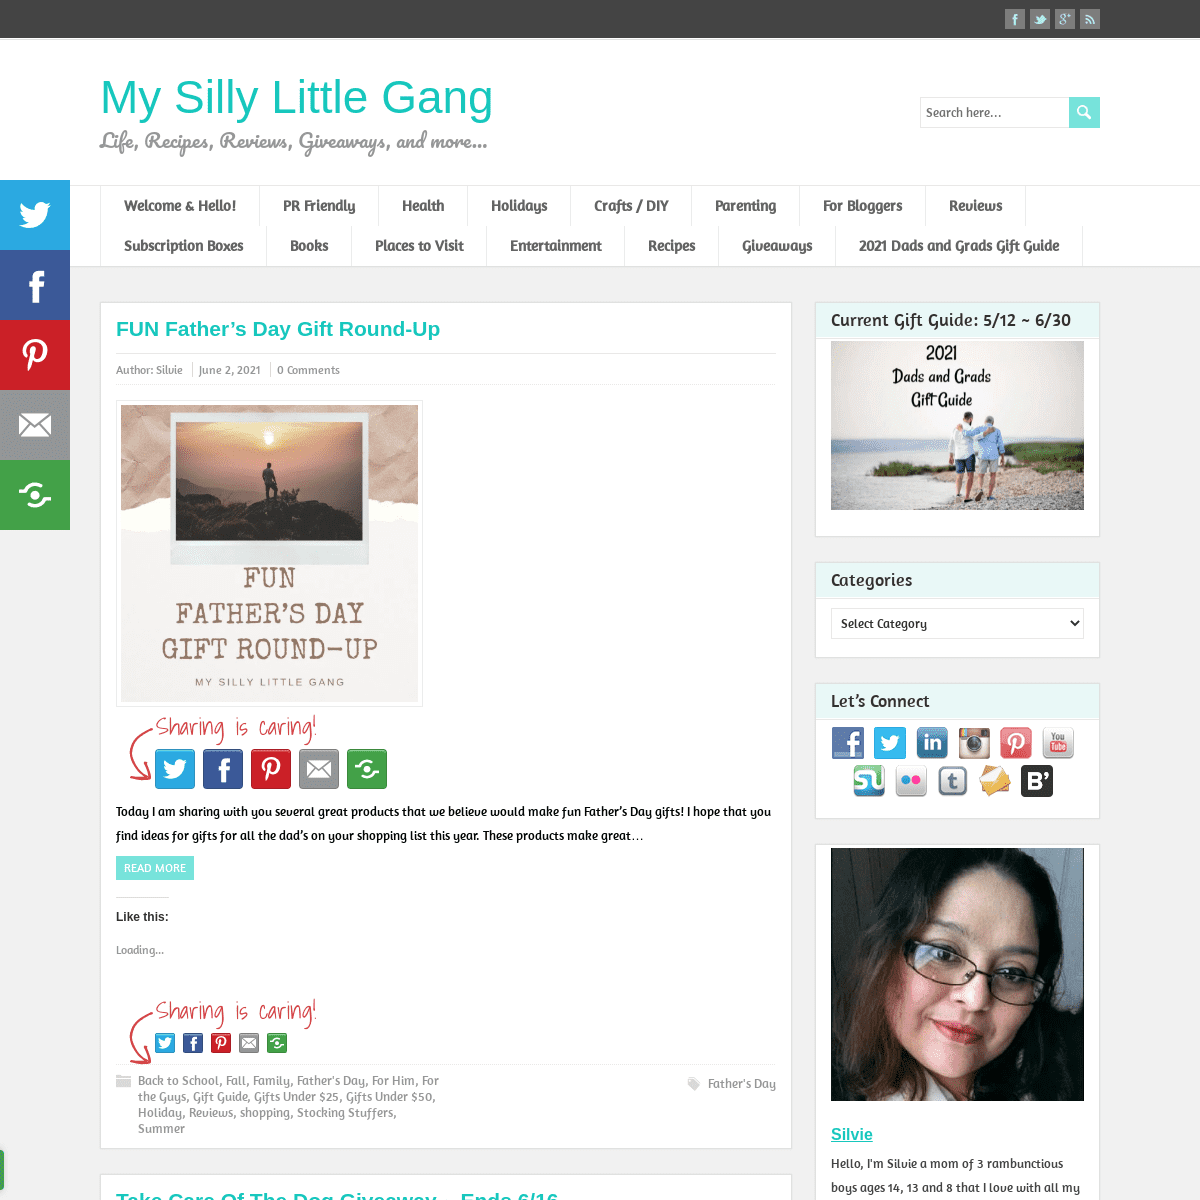 A complete backup of https://mysillylittlegang.com